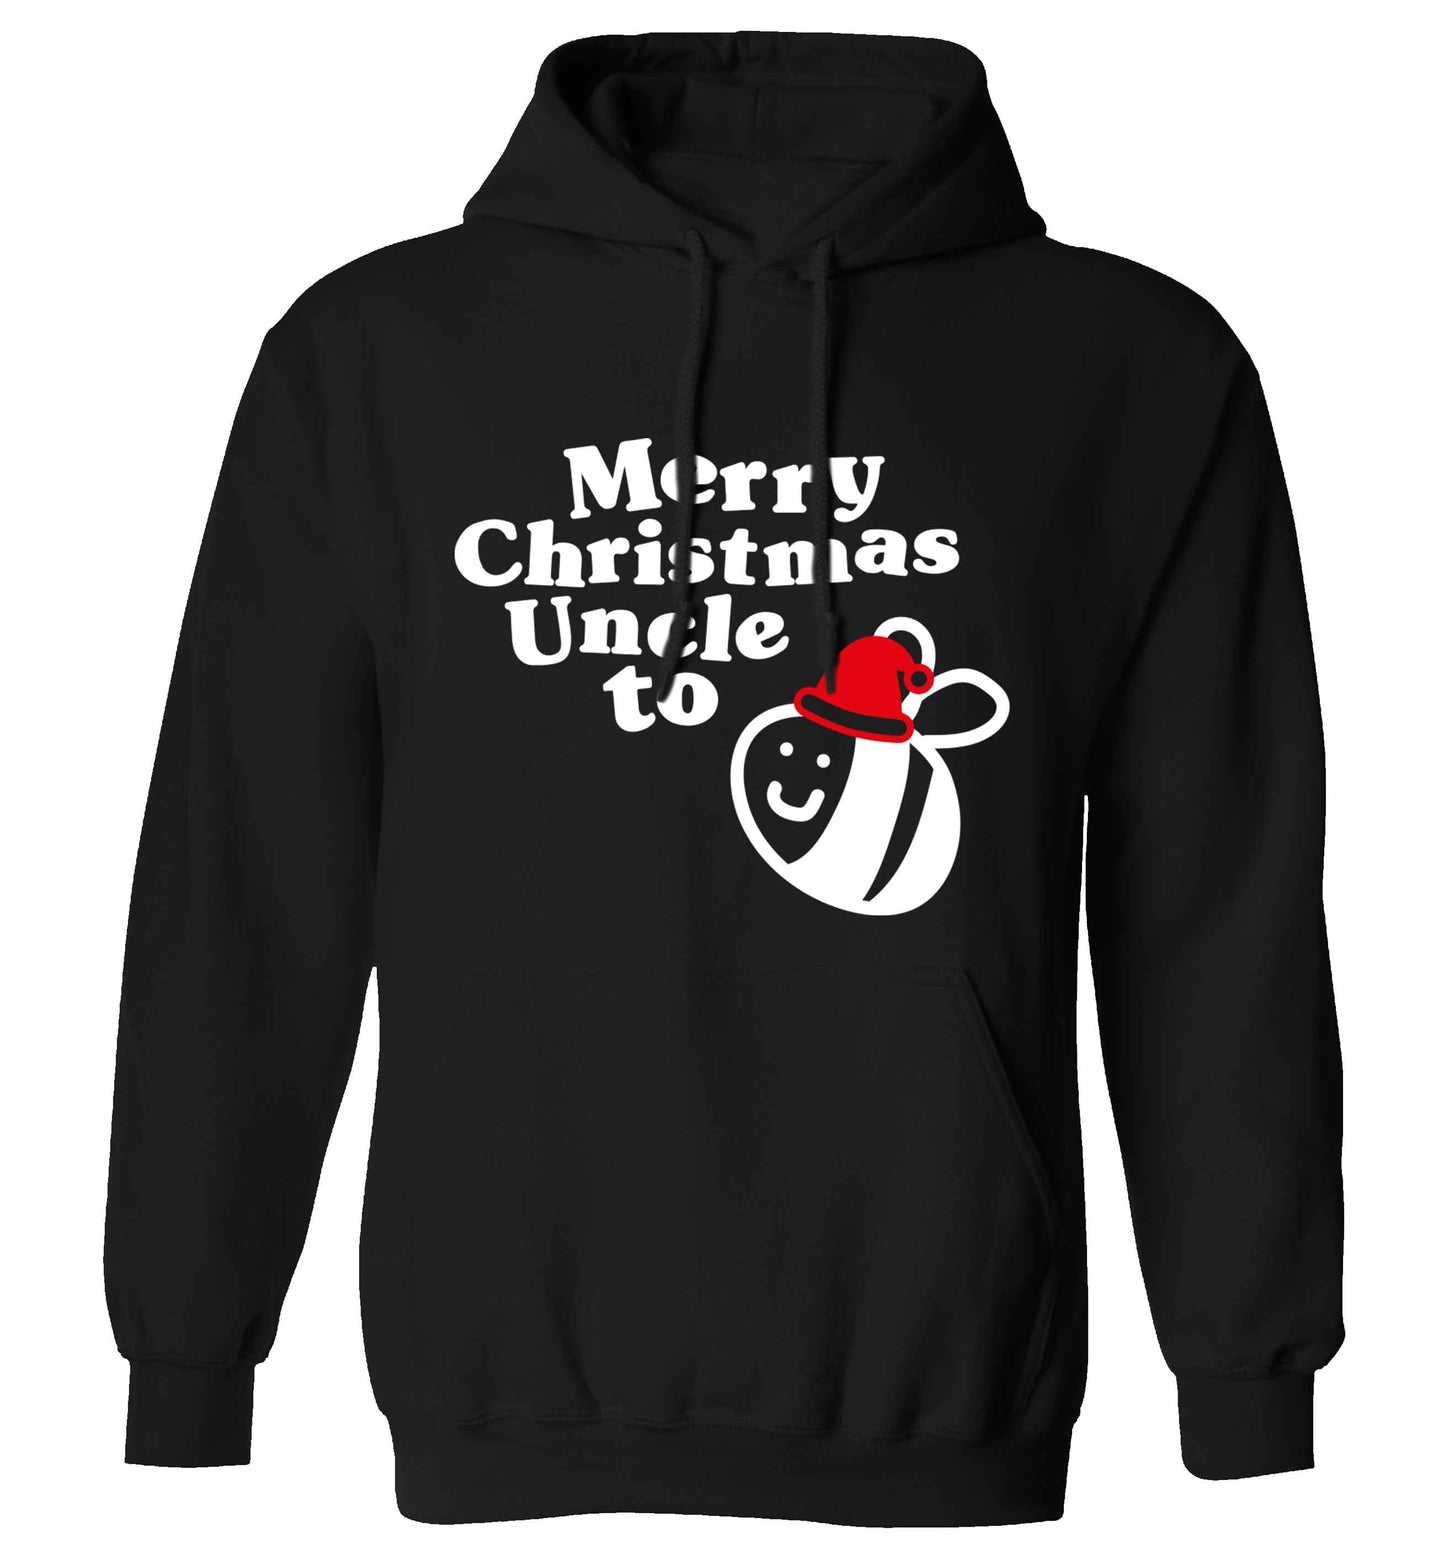 Merry Christmas uncle to be adults unisex black hoodie 2XL